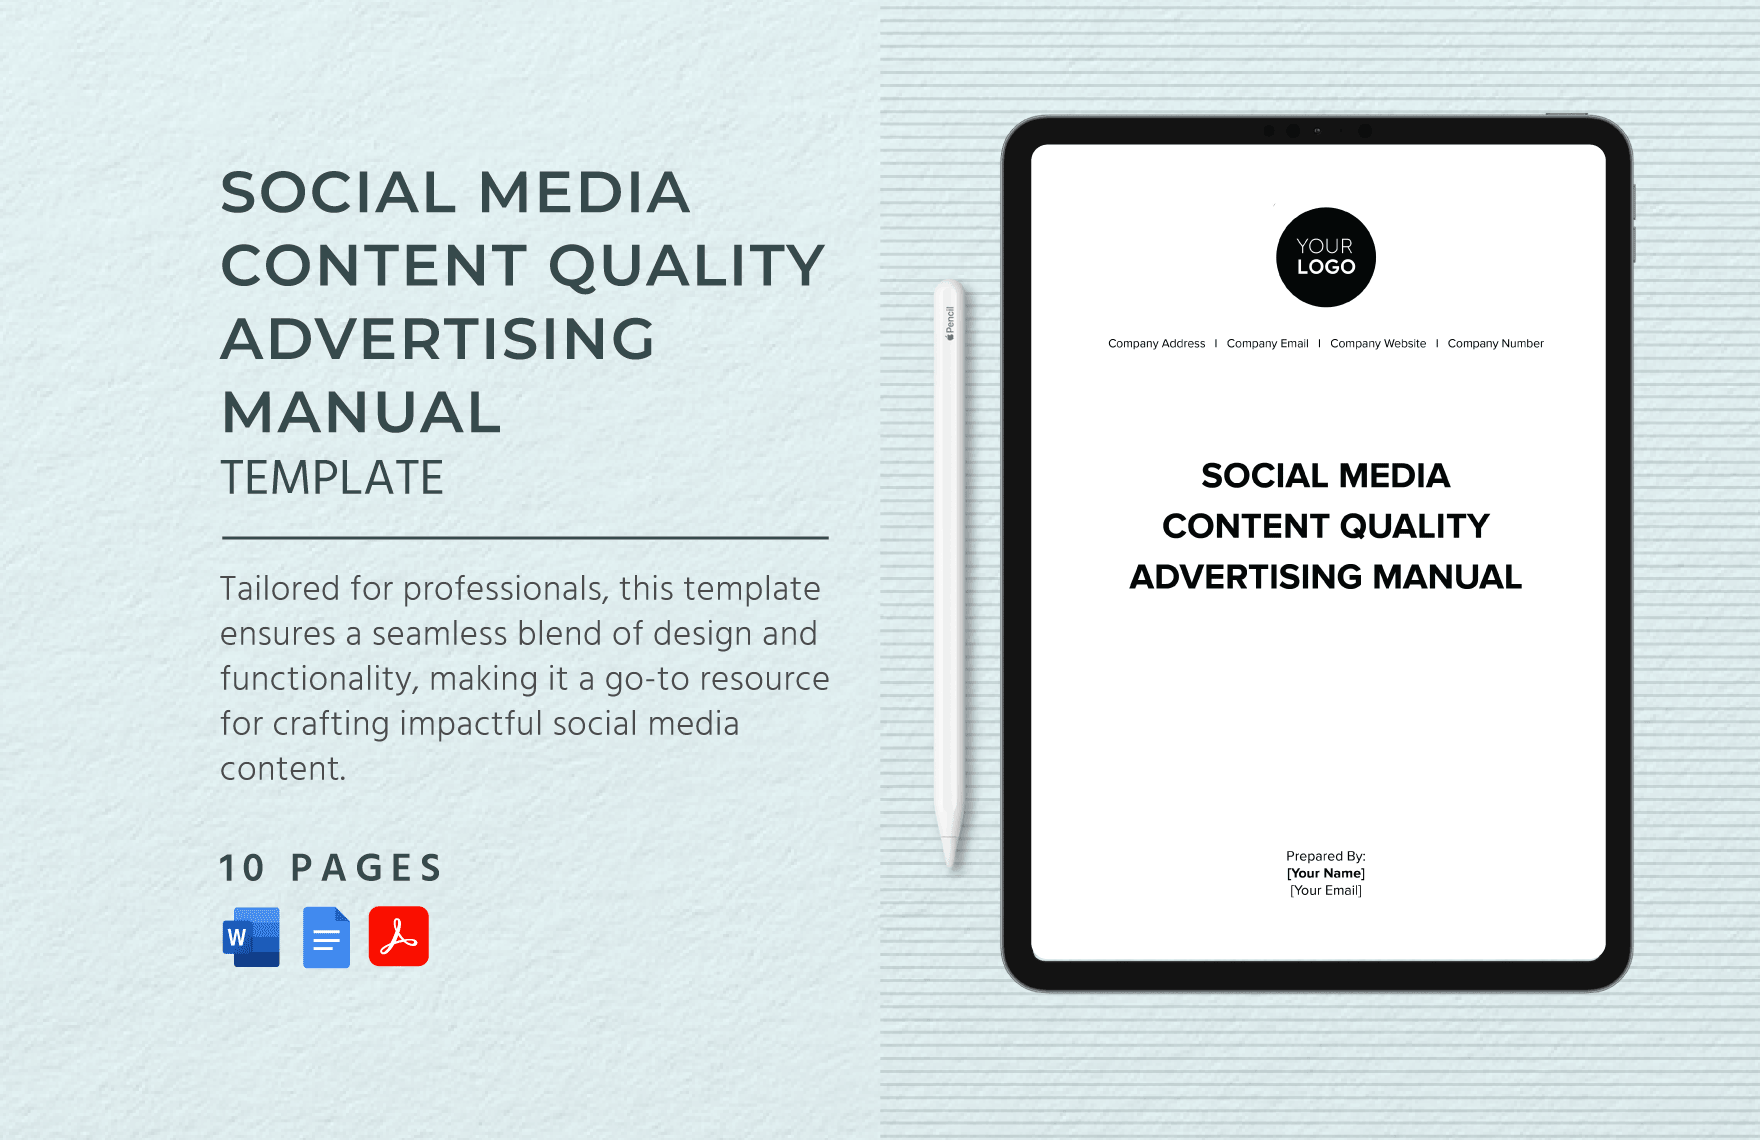 Social Media Content Quality Advertising Manual Template